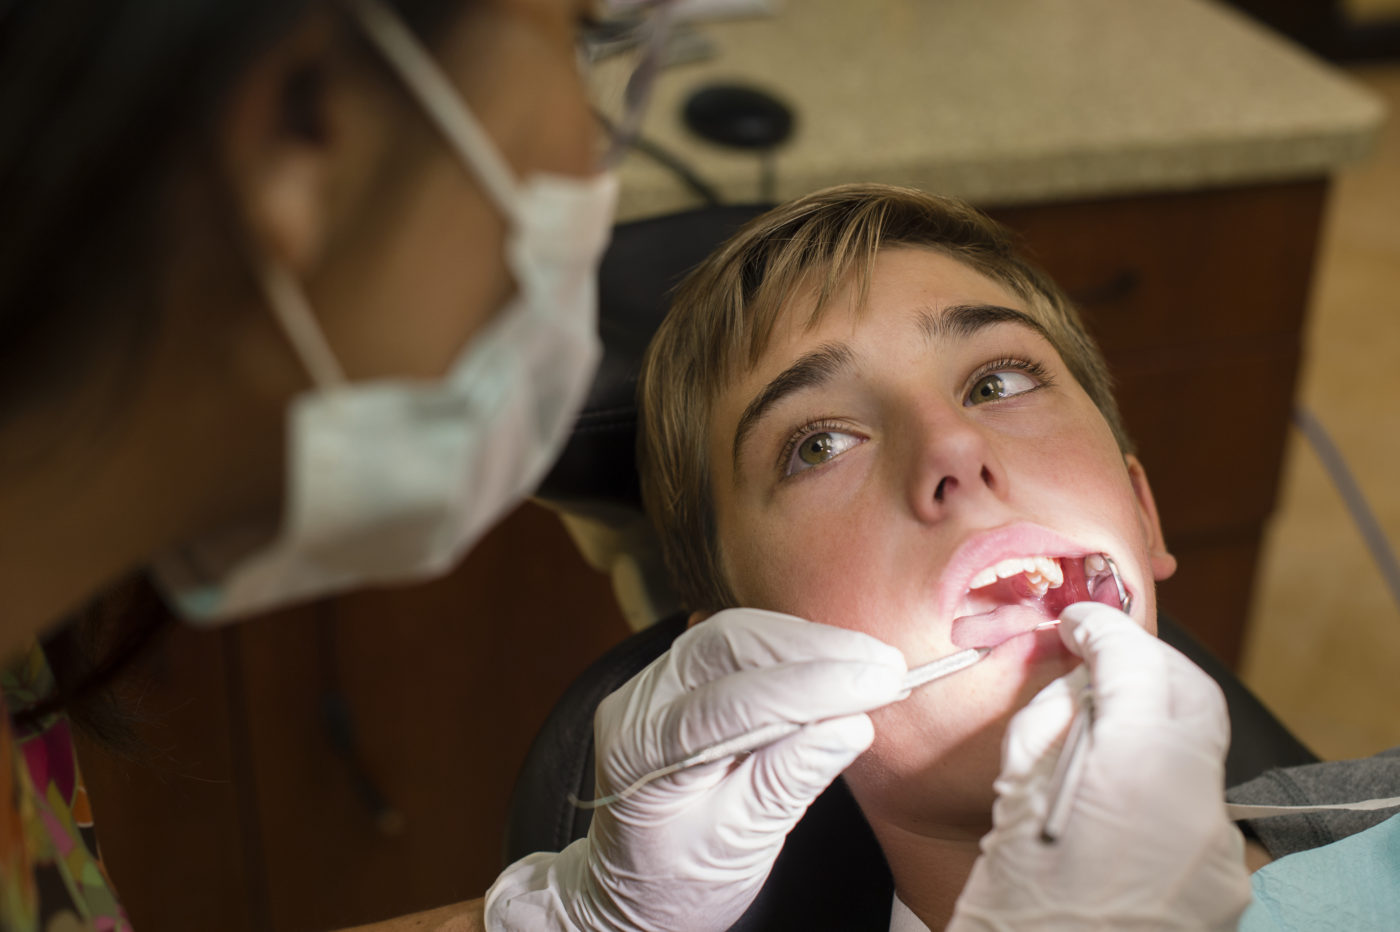 A Bupa Dental Care dentist examining dental patient's mouth.